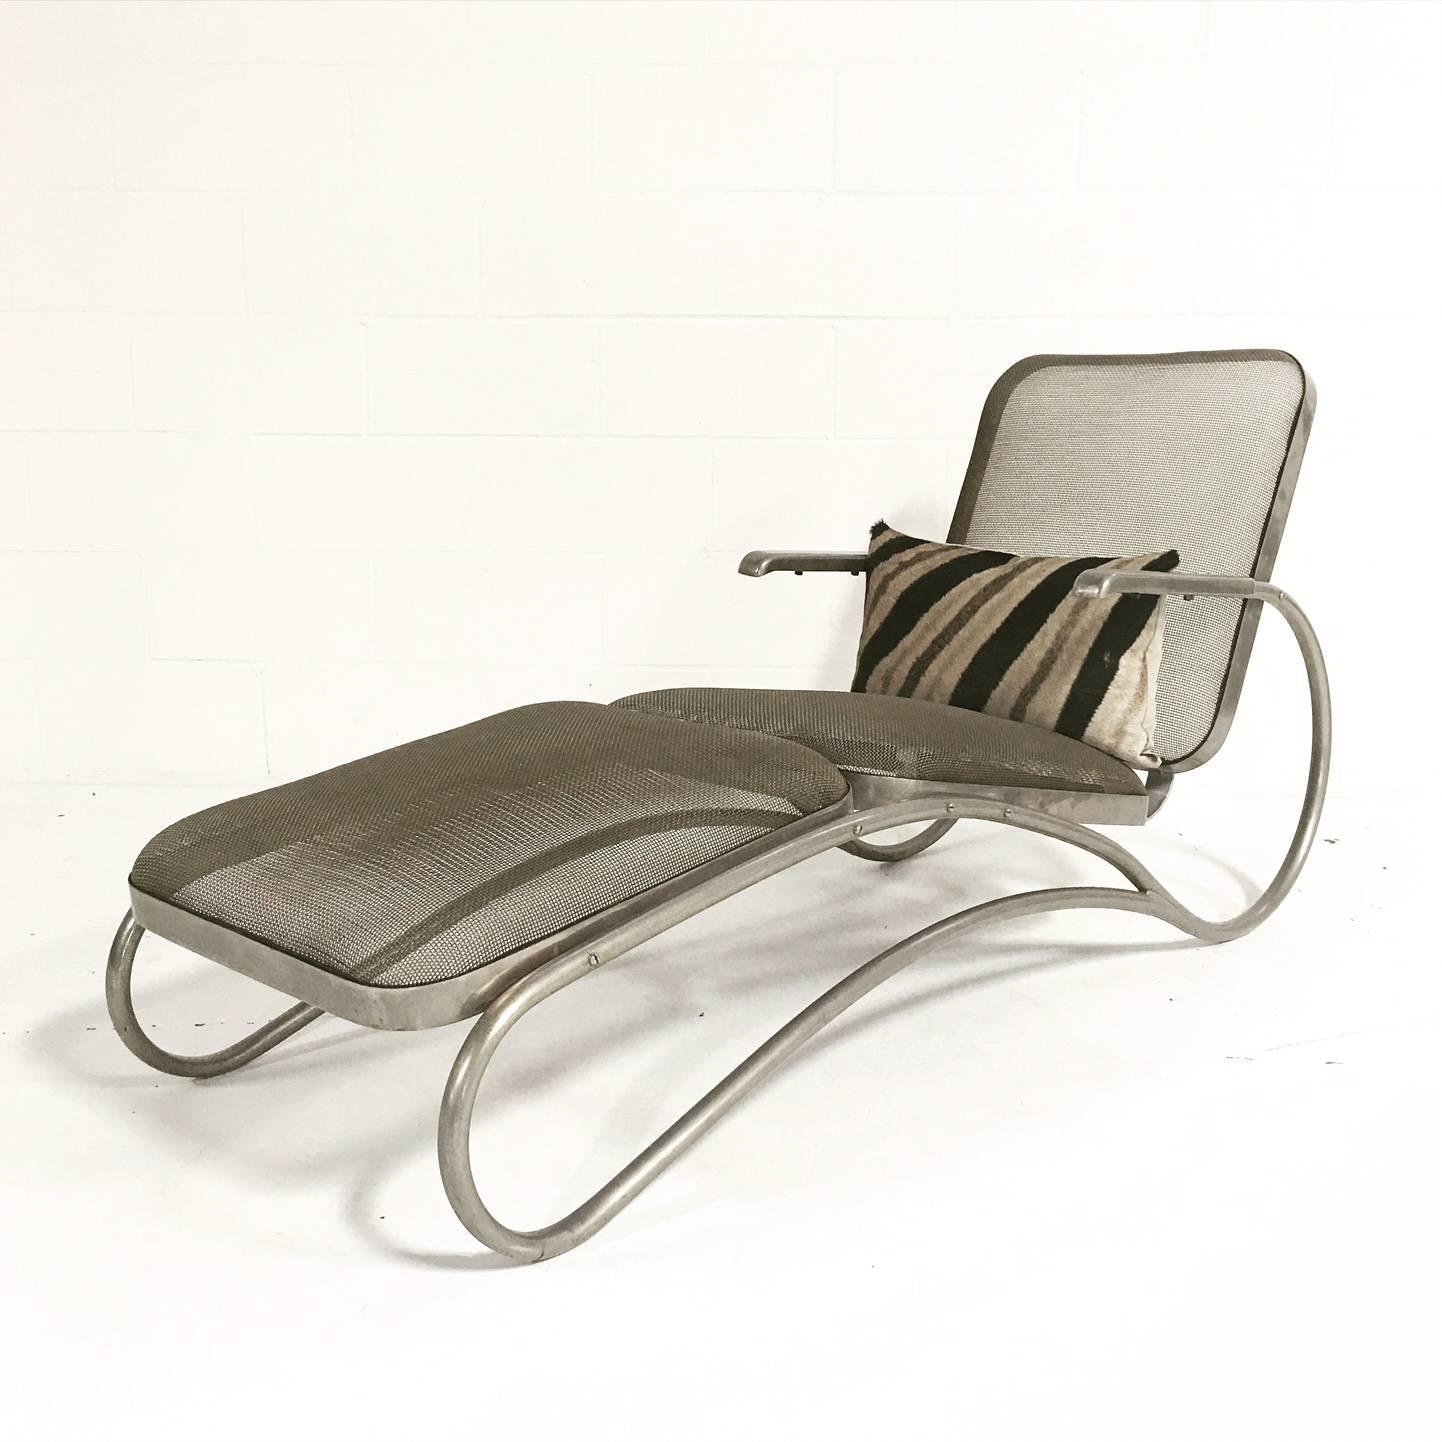 I mean. This chaise is just so cool. The design is brilliant. The iron mesh is strong as hell yet flexible. When you lay down, it molds to your body. We really don't want to sell this but could not keep it to ourselves, it's just that cool. We added